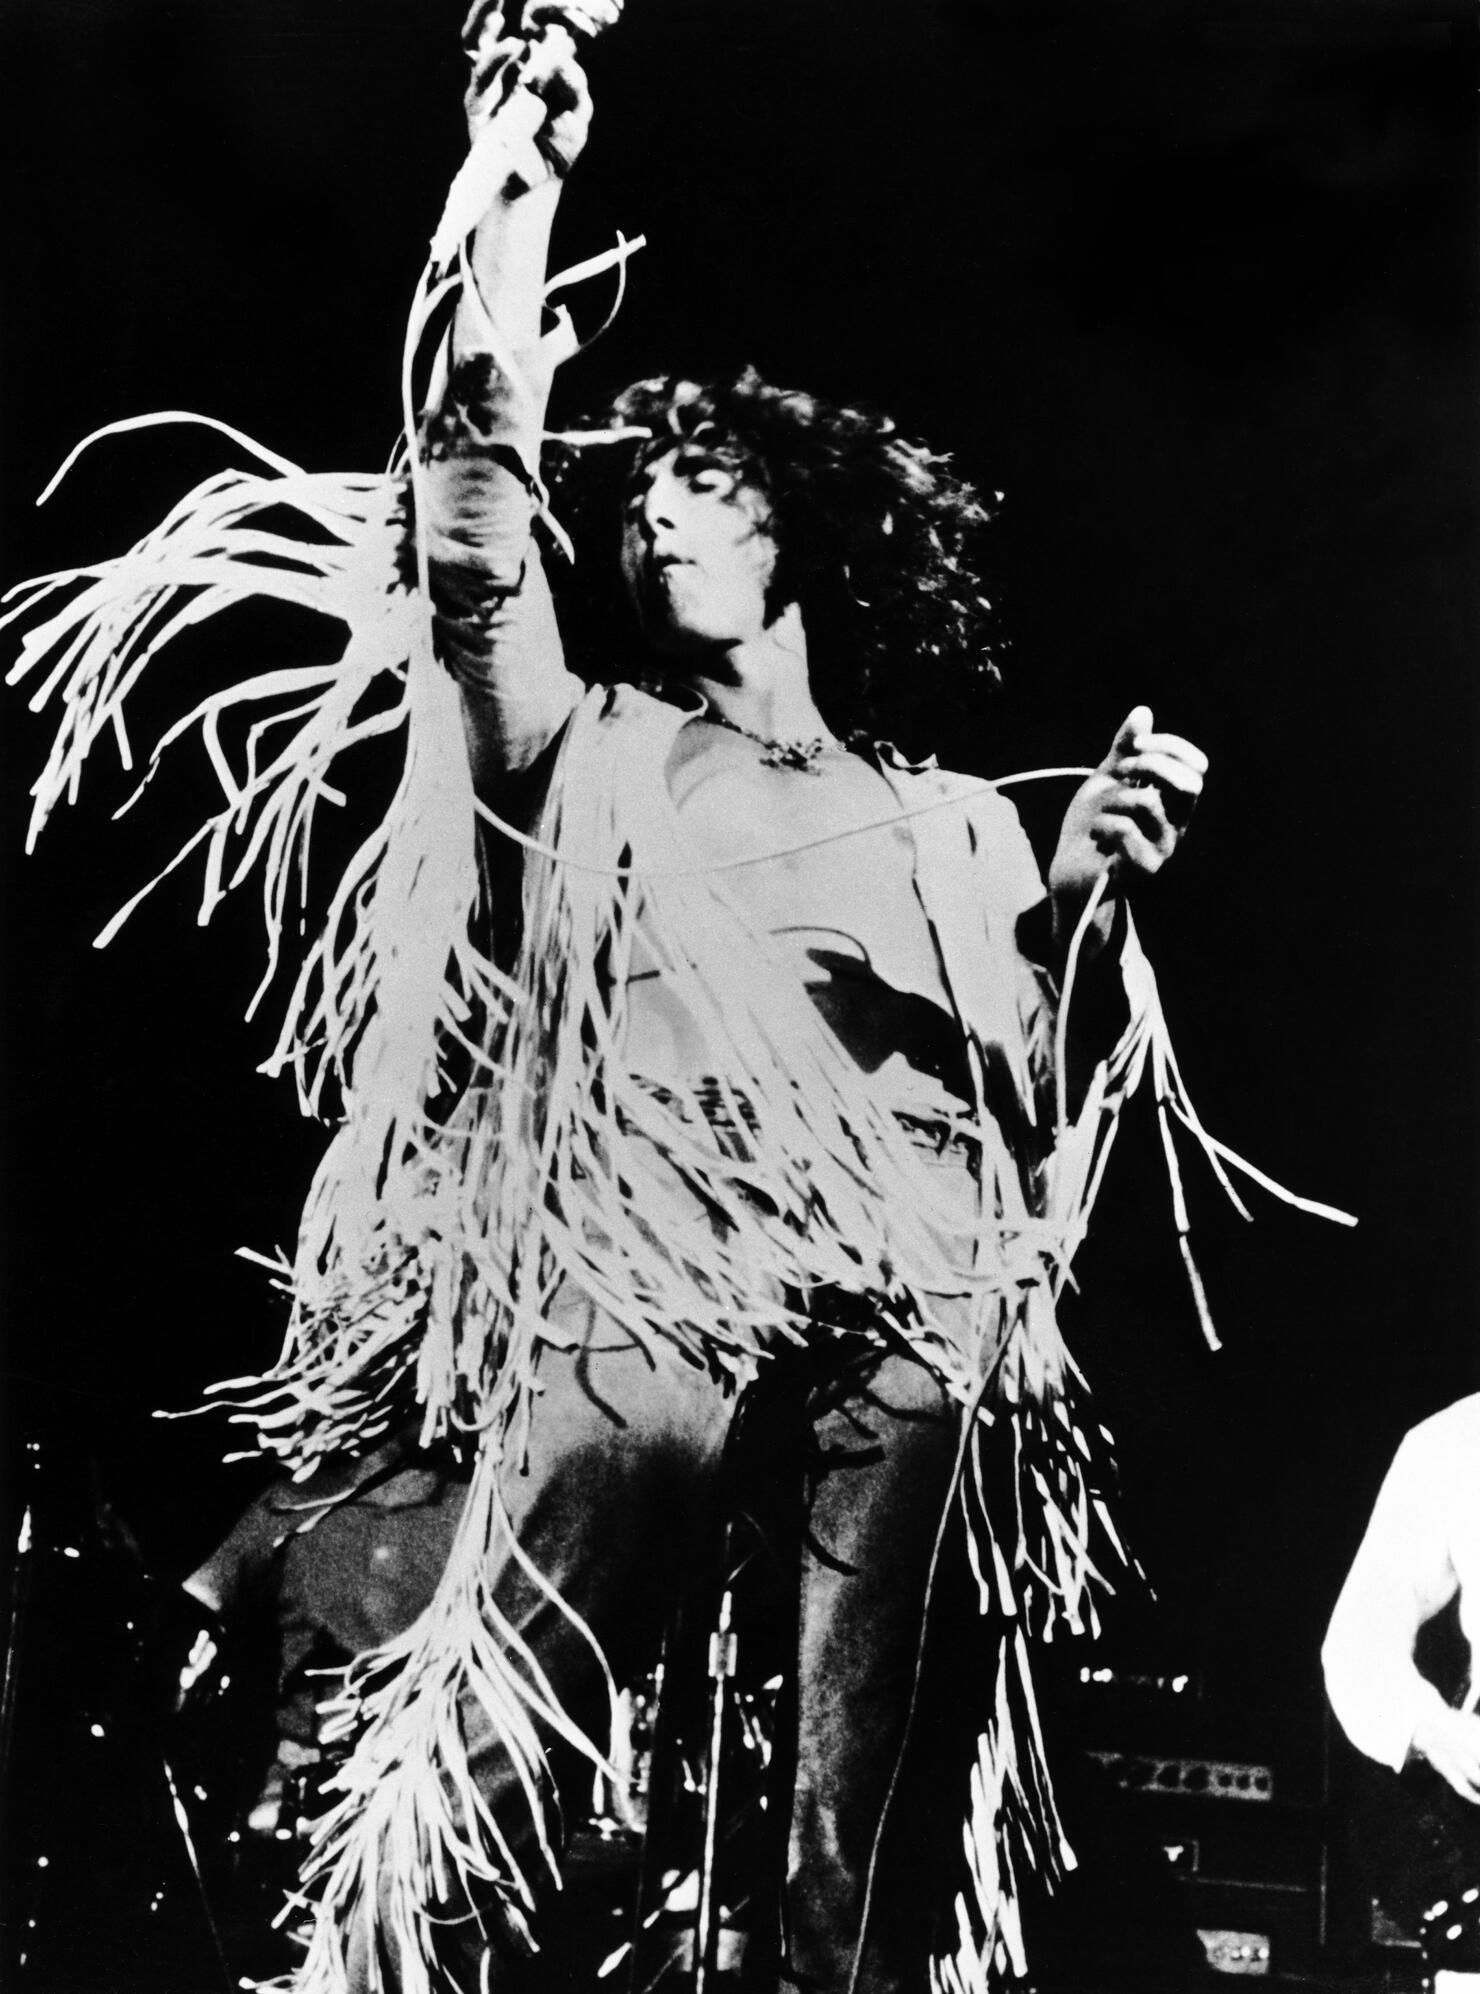 The Who's Roger Daltrey performing at Woodstock in 1969